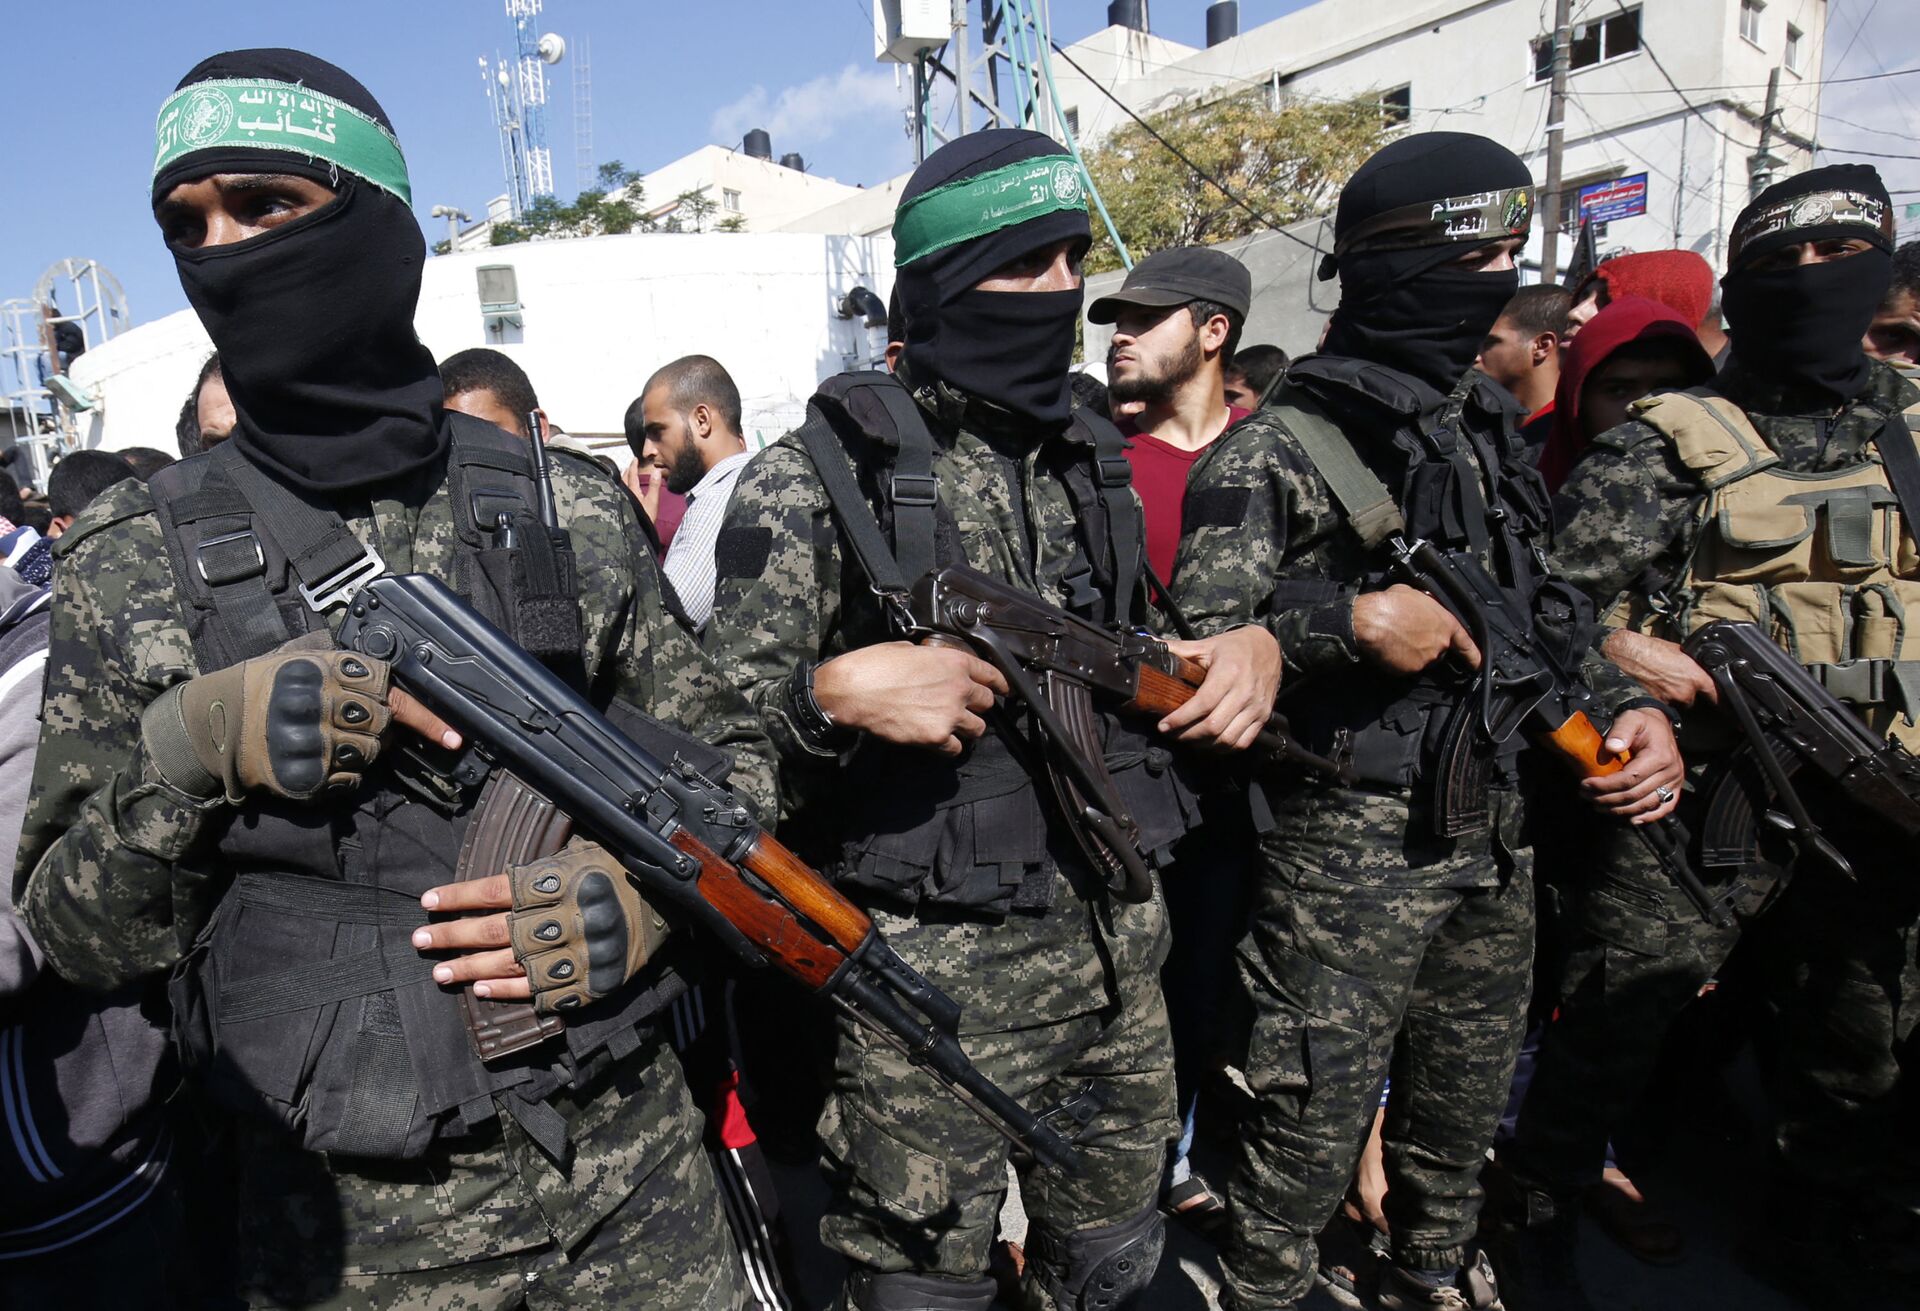 Palestinian militants of the Islamist movement Hamas' military wing Al-Qassam Brigades, attend the funeral of seven Palestinians, killed during an Israeli special forces operation in the Gaza Strip, on November 12, 2018, in Khan Younis - Sputnik International, 1920, 15.06.2022